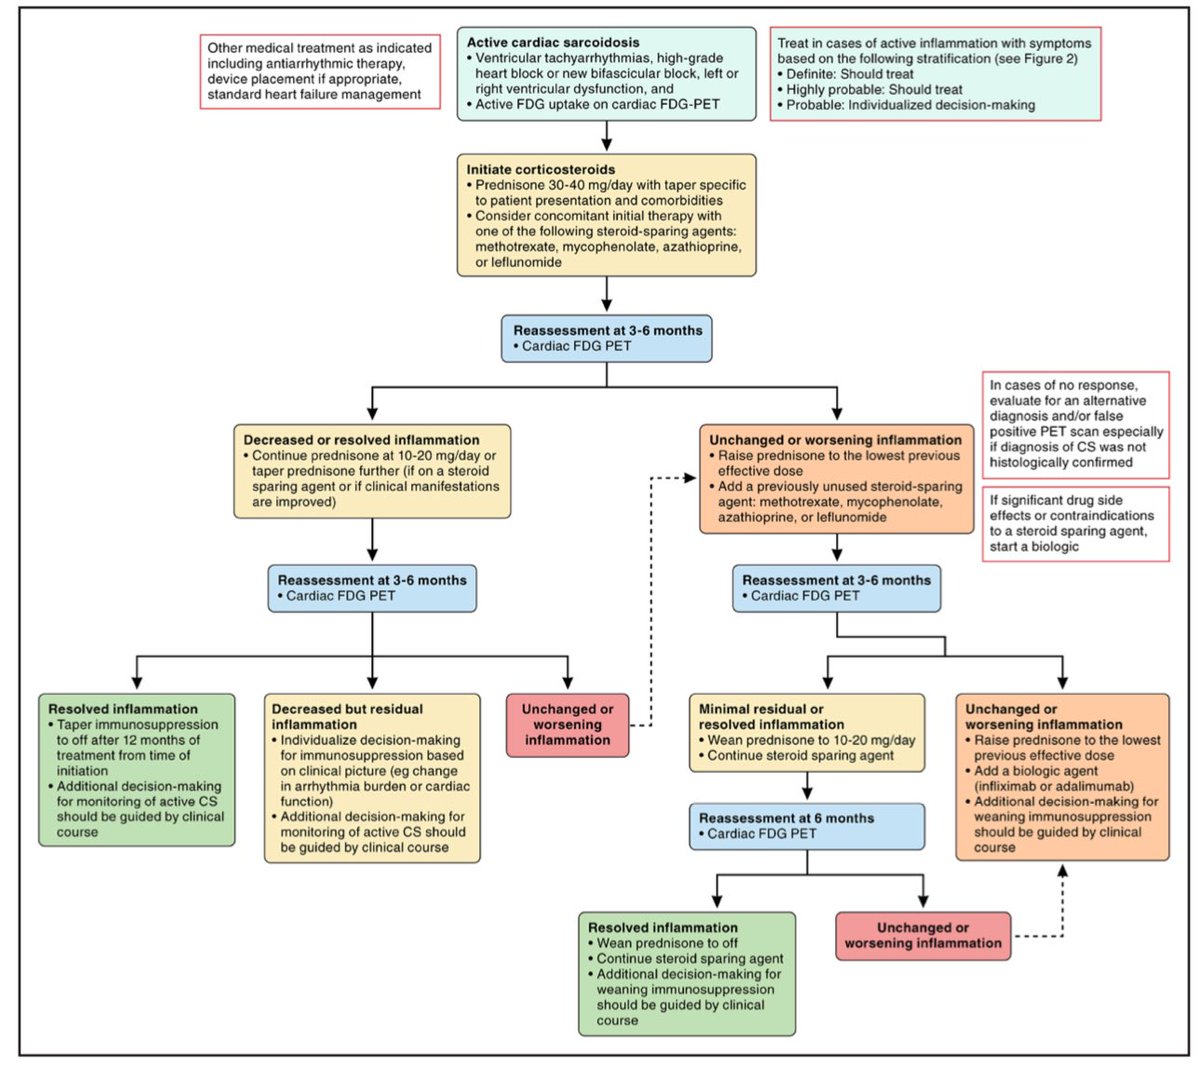 🔴 Diagnosis and Management of Cardiac Sarcoidosis: A Scientific Statement From the American Heart Association #openaccess #2023Review 
 
ahajournals.org/doi/abs/10.116…
#CardioEd #Cardiology #FOAMed #meded #MedEd #Cardiology #CardioTwitter #cardiotwitter #cardiotwiteros #CardioEd